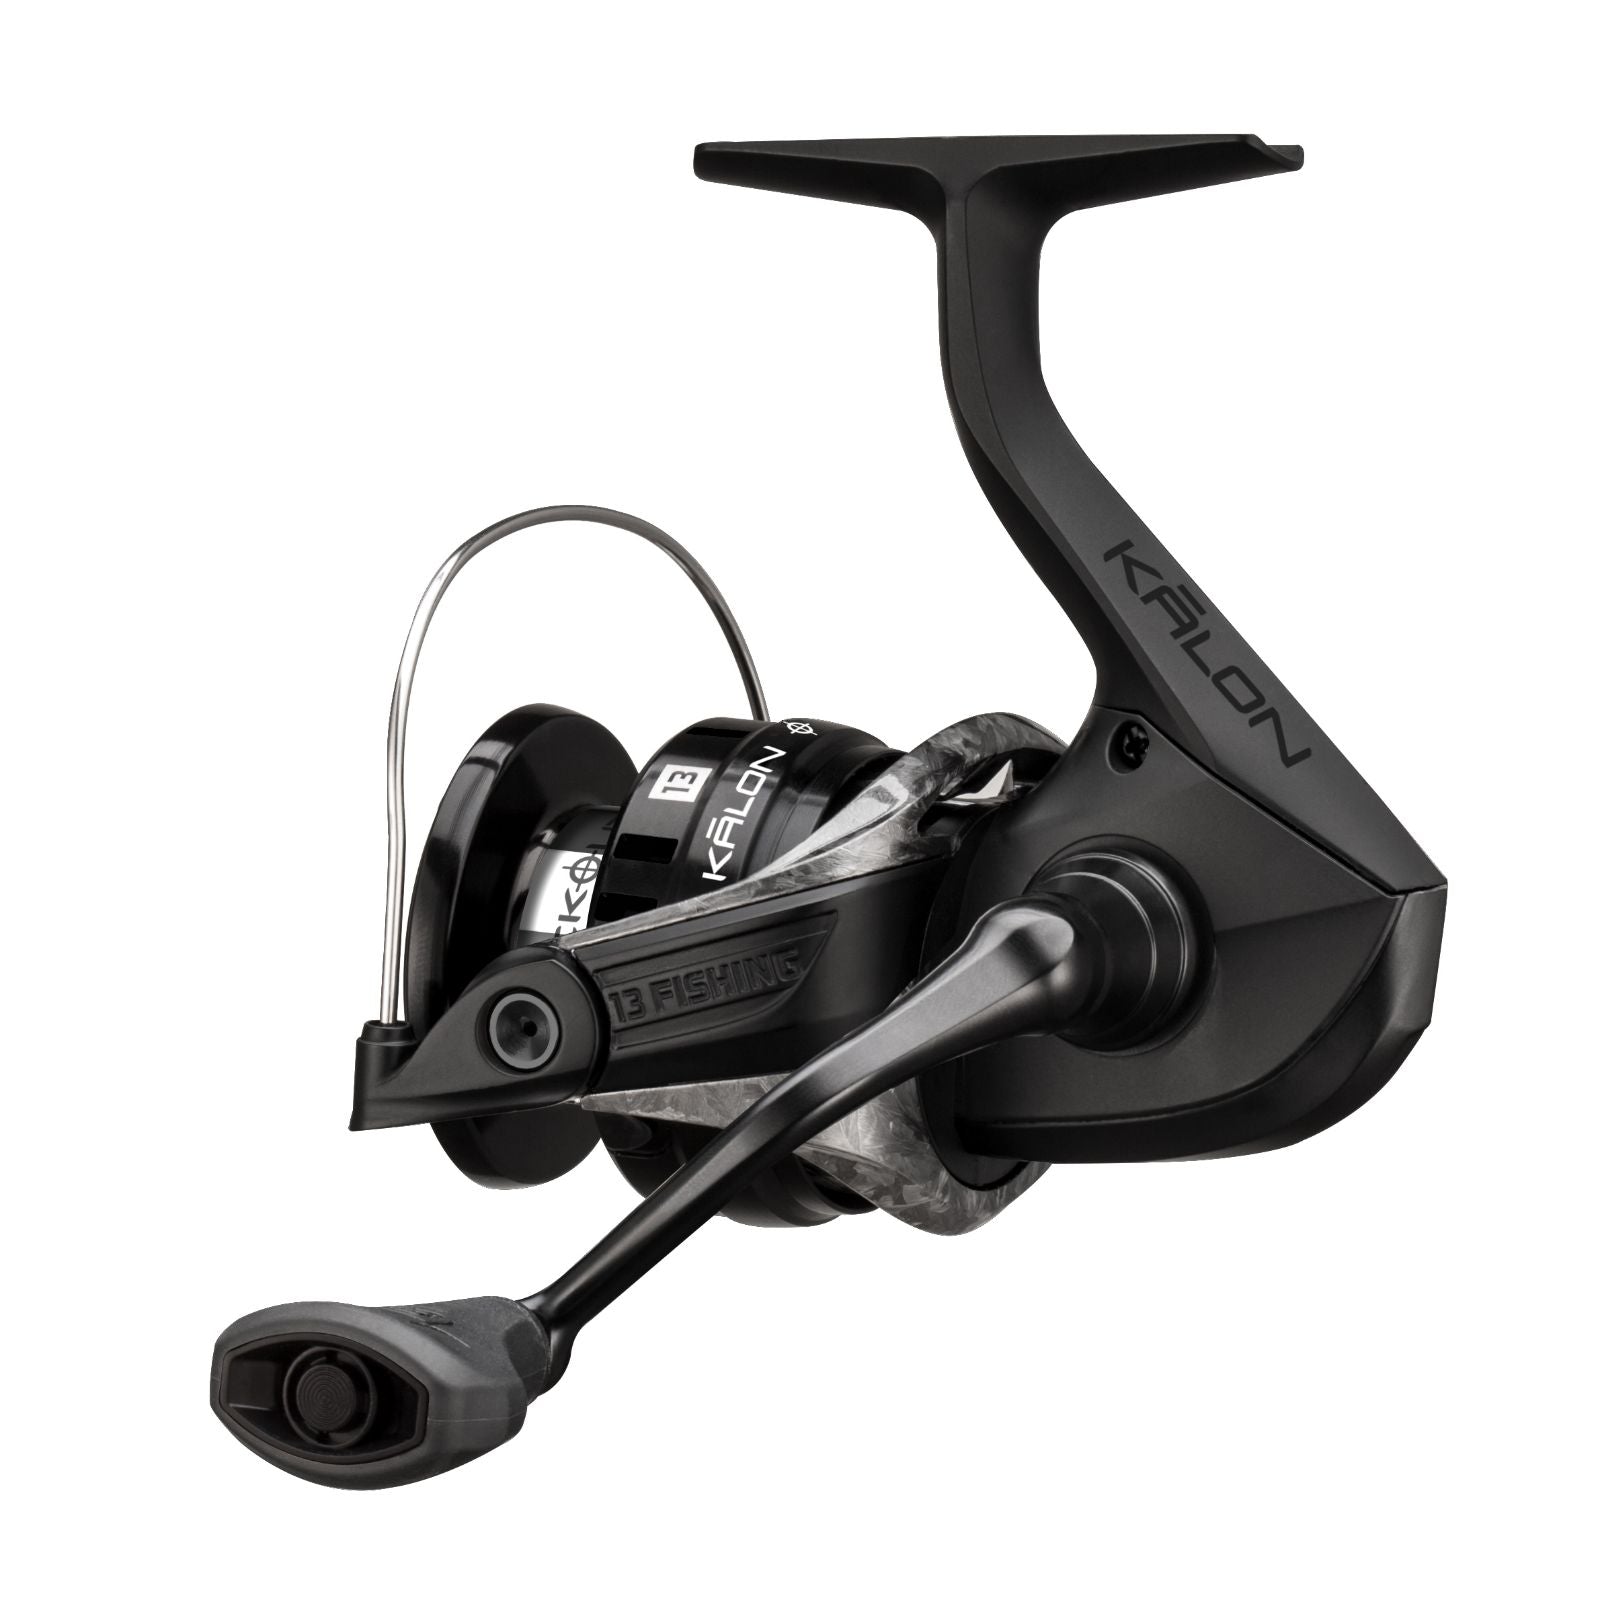 Blackout 13 Fishing Kalon O Spinning Reel from Fish On Outlet